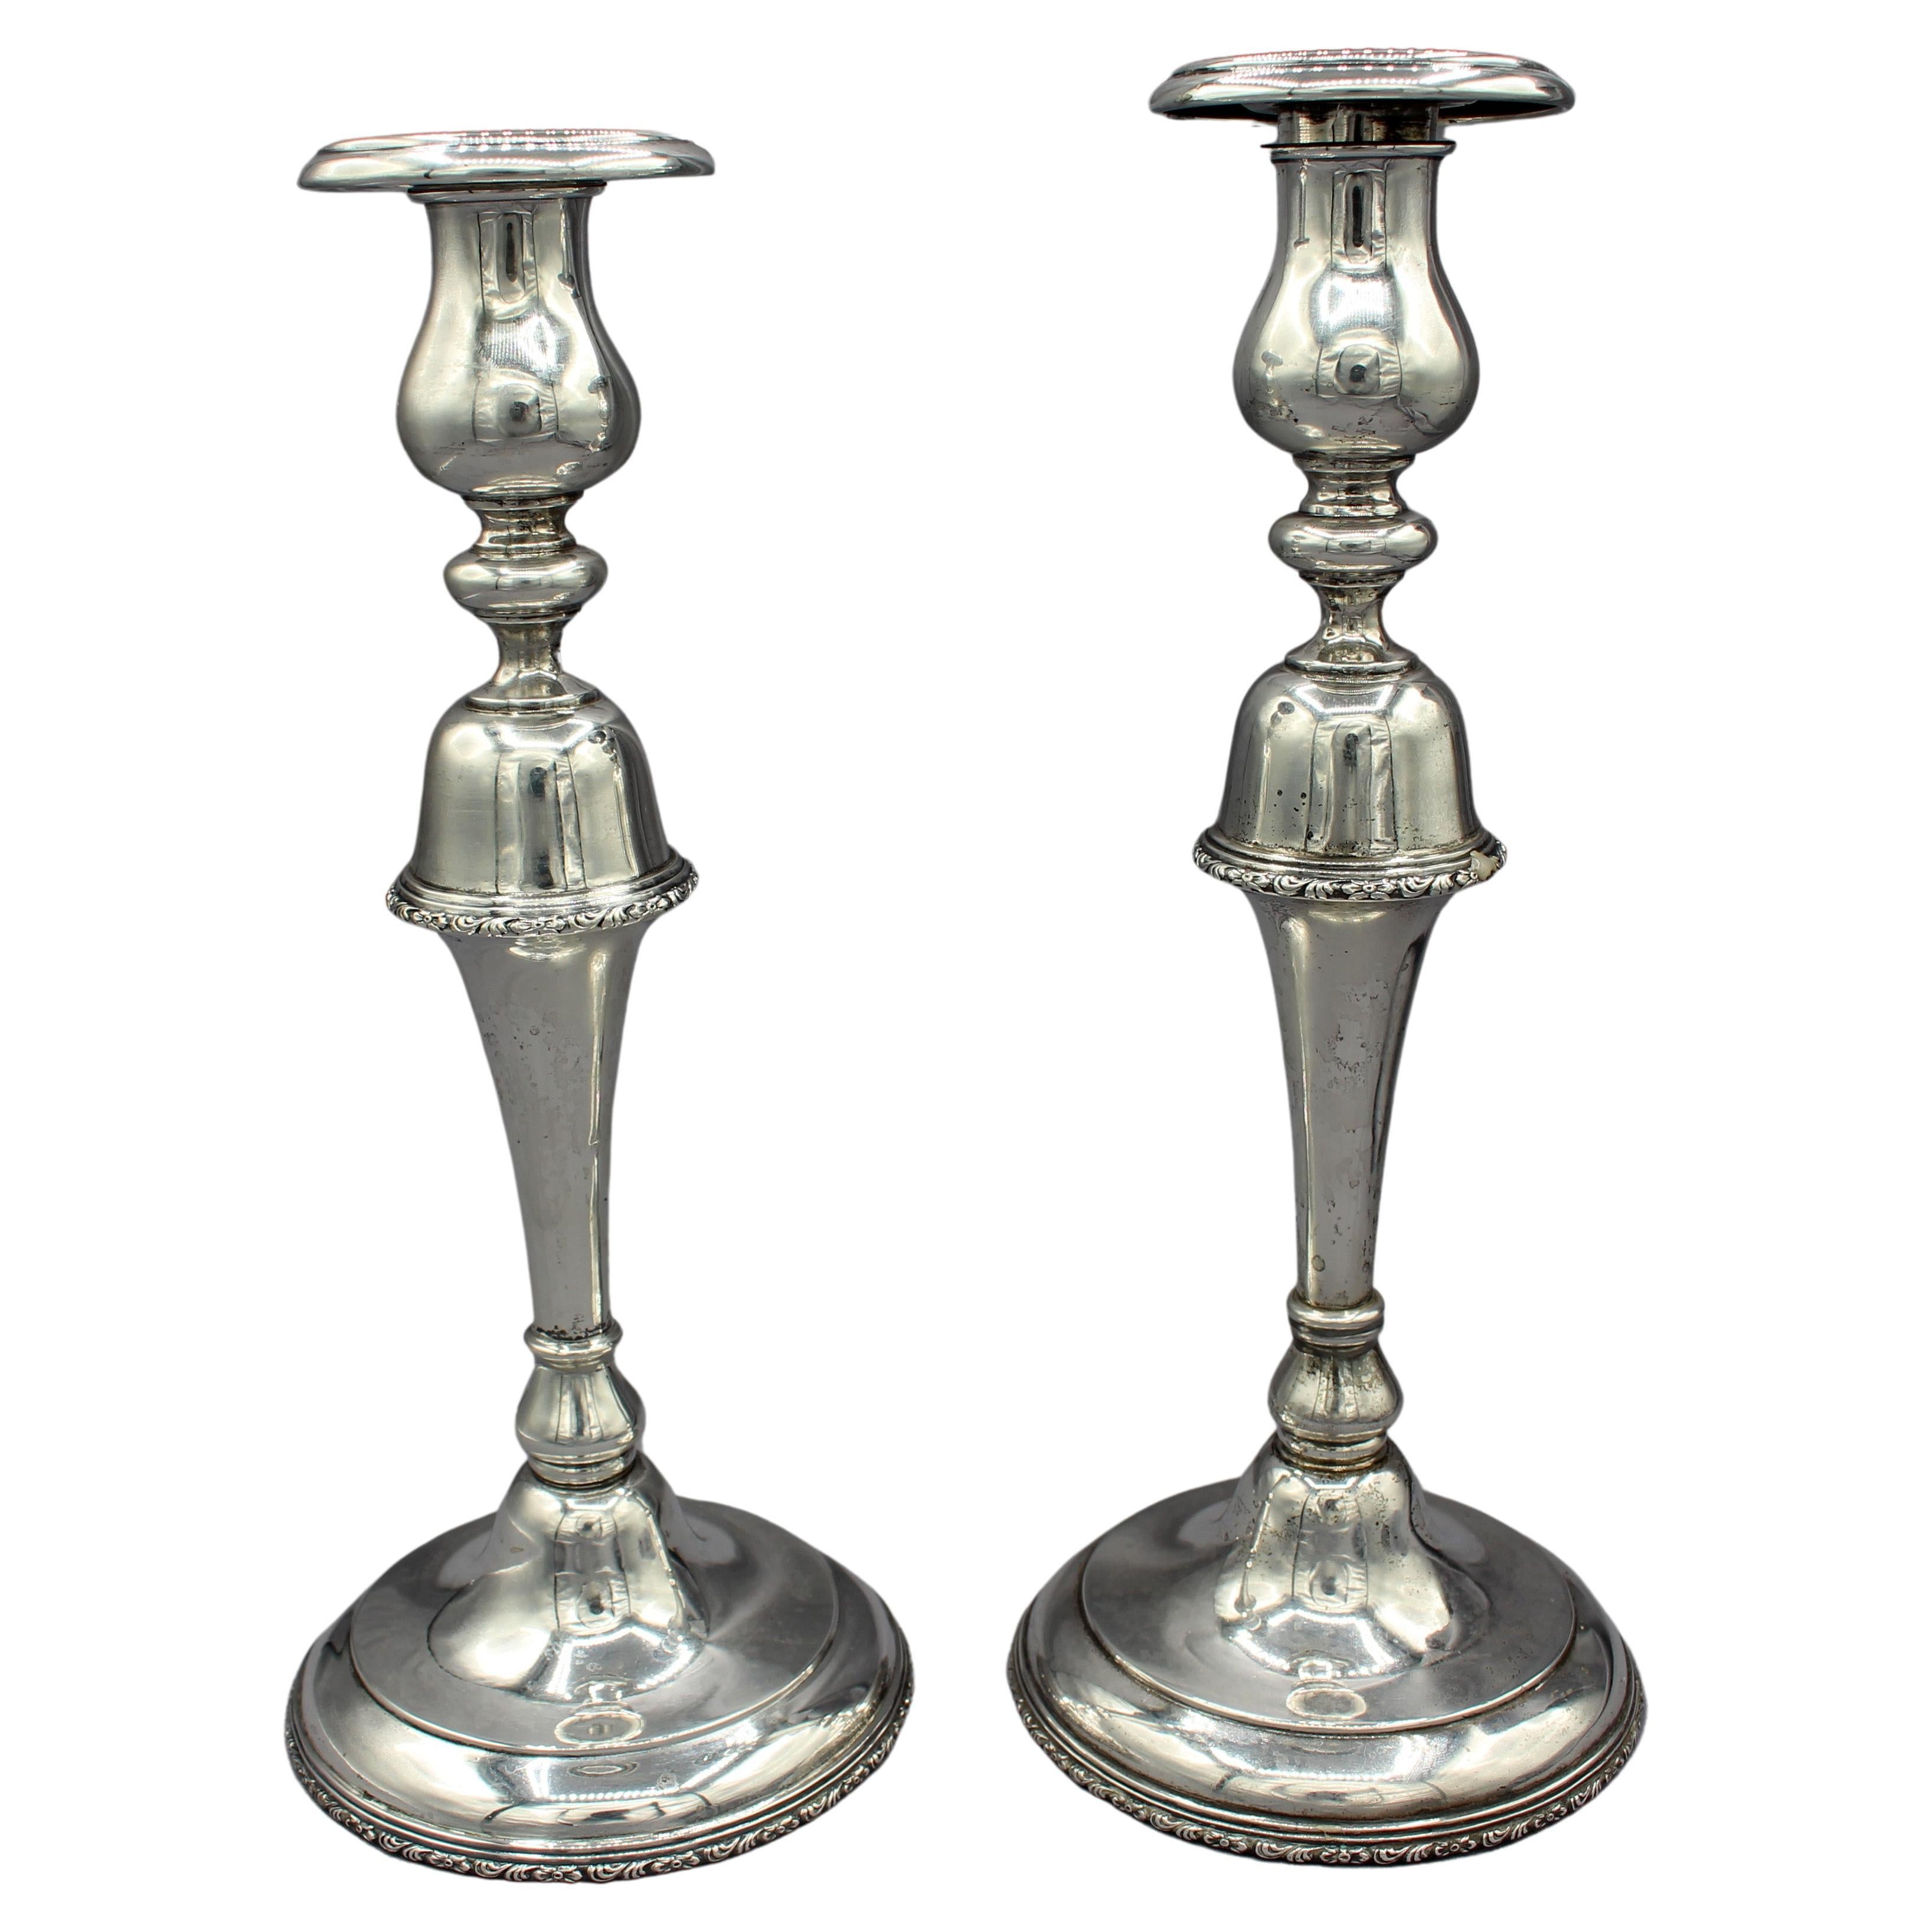 Pair of c. 1920-30 Sterling Silver Candlesticks